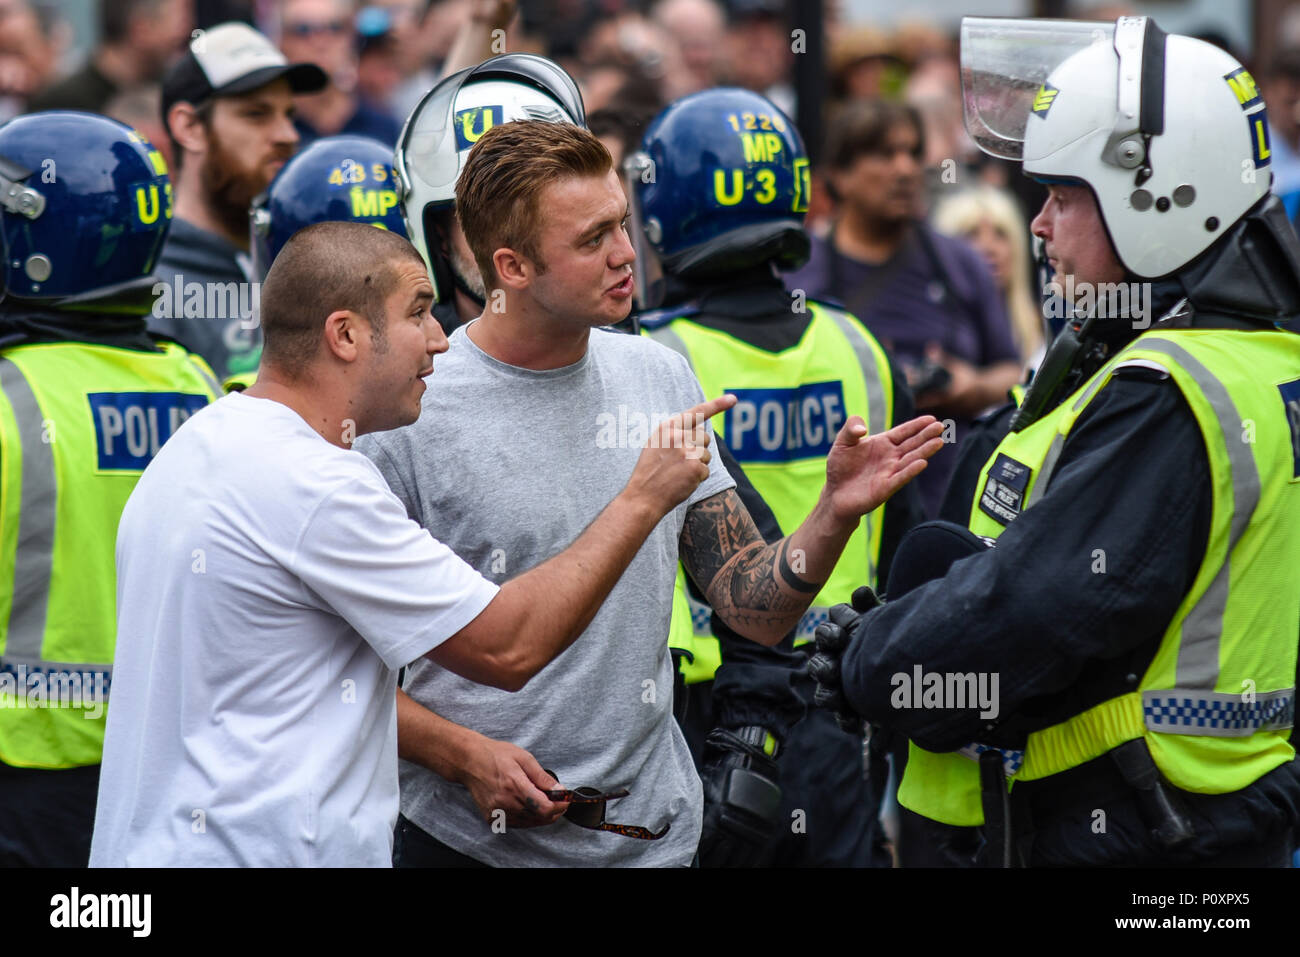 Supporters of Tommy Robinson such as the EDL protested in London demonstrating for his release. At times this turned to violence against police Stock Photo